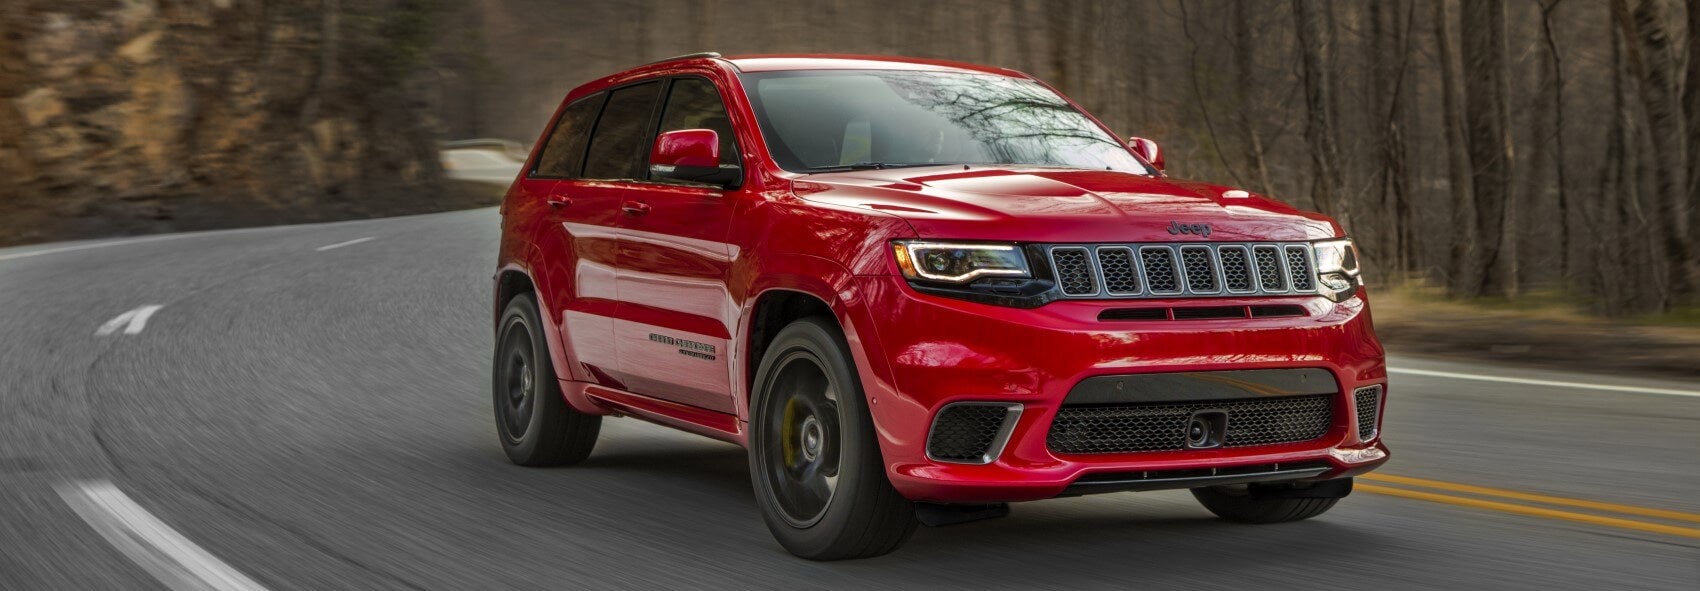 Jeep Grand Cherokee Lease Deals